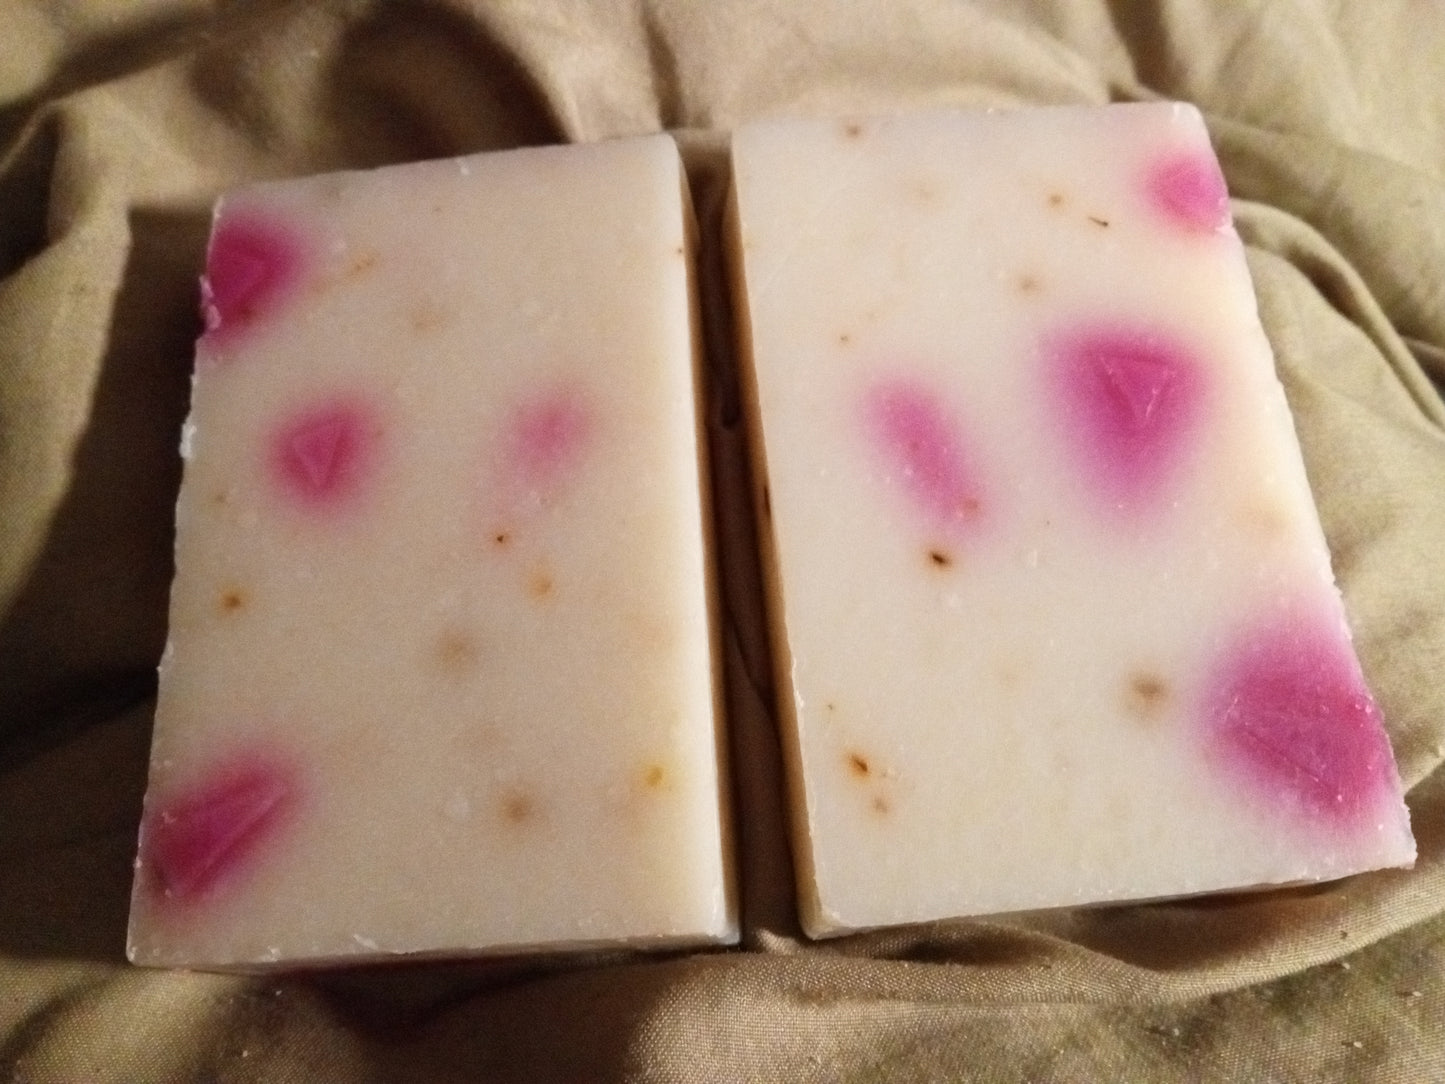 Pedal dance cold process soap extra moisturizing with strong luxurious fragrance approximately 4.8 oz made in the USA handcrafted